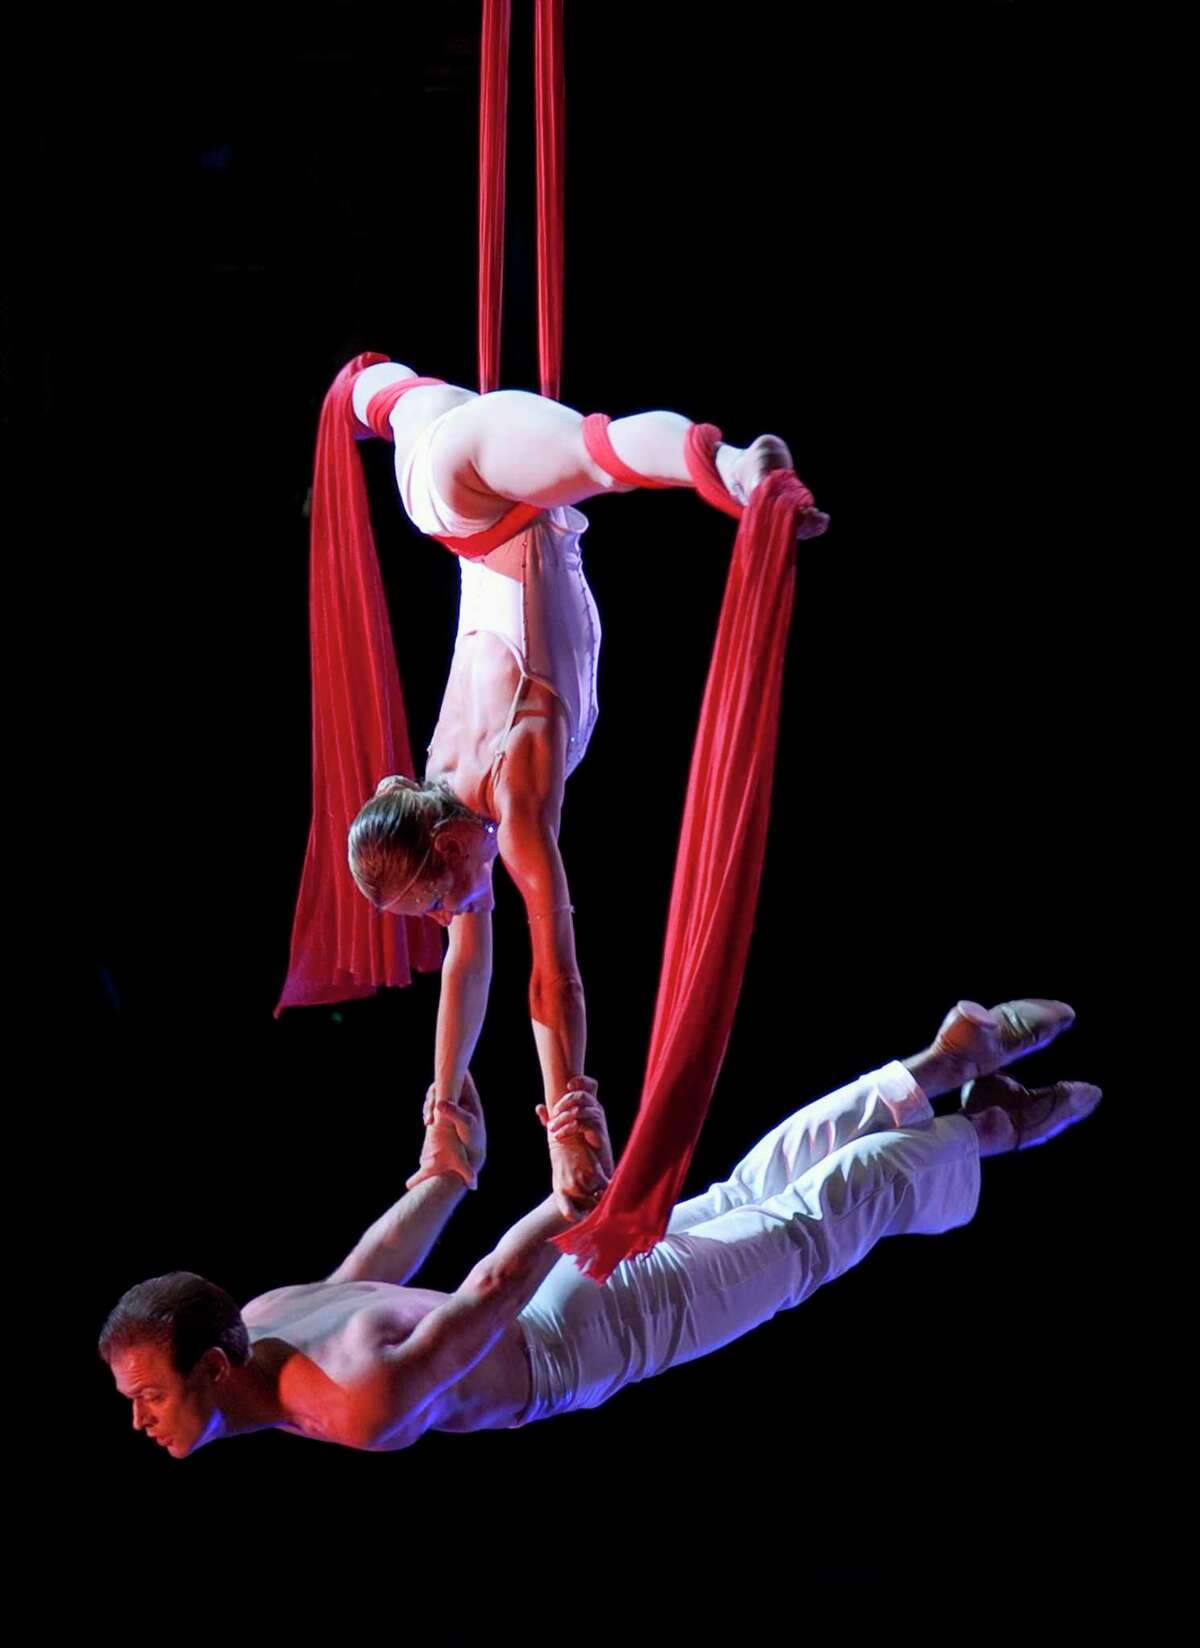 Greater Connecticut Youth Orchestras and Cirque de la Symphonie will team for two performances at Bridgeport’s Klein Memorial Auditorium, with the musicians accompanying the aerialists, contortionists, jesters, dancers, and strongmen of the Athens, Georgia-based touring troupe.